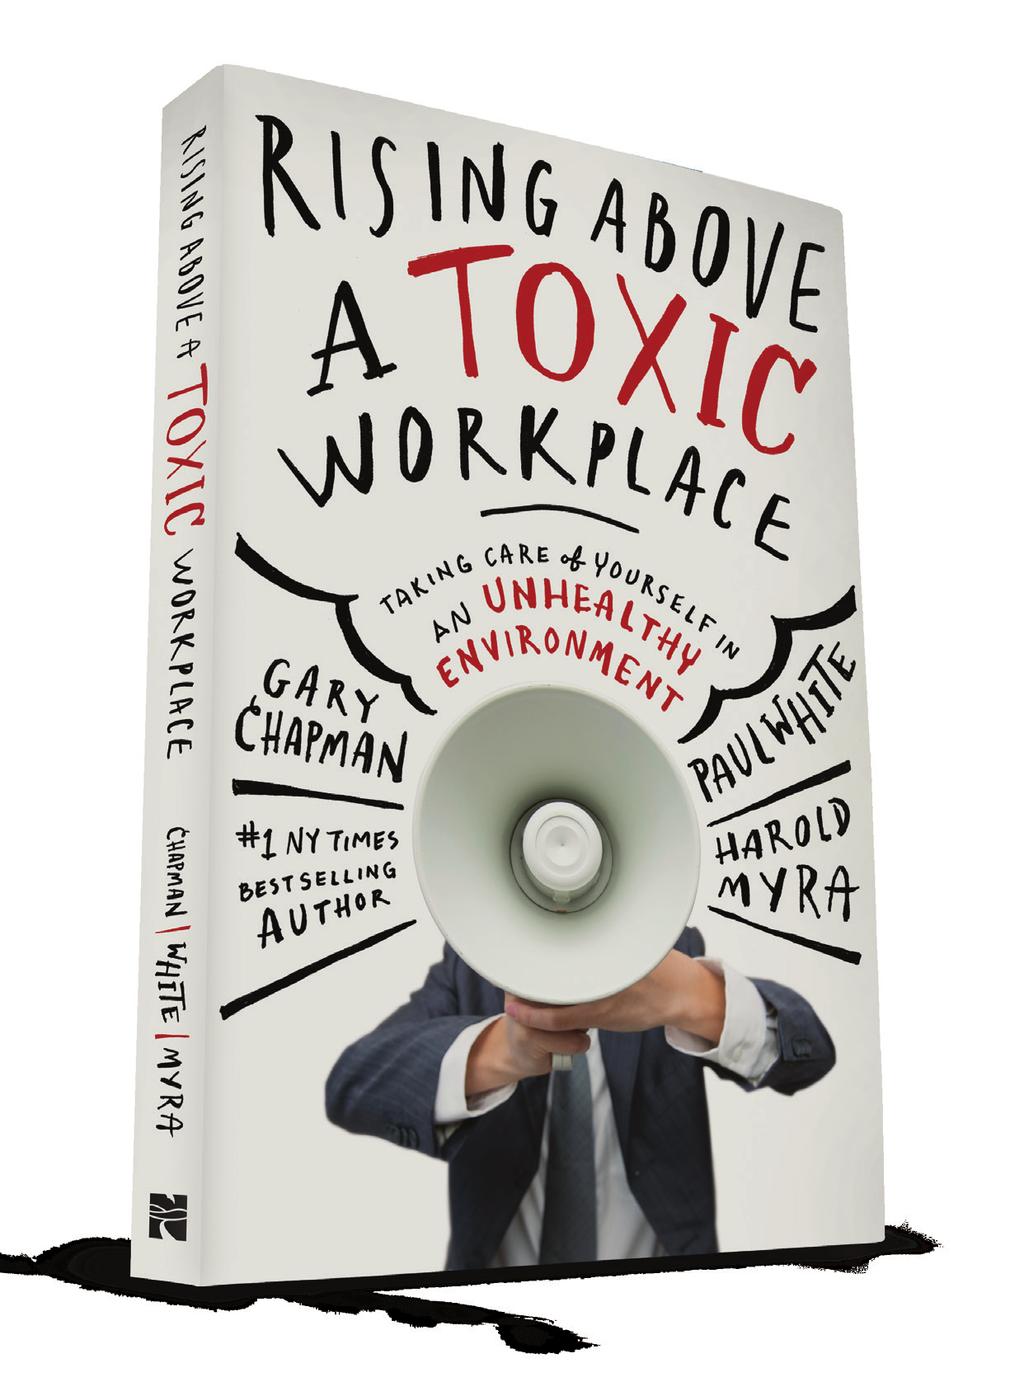 BRUTAL BOSSES. POISONOUS PEOPLE. SOUL-CRUSHING CULTURES. This book will give you the confidence to rise above them all. Do you work in a toxic environment or have a toxic boss? You re not alone!